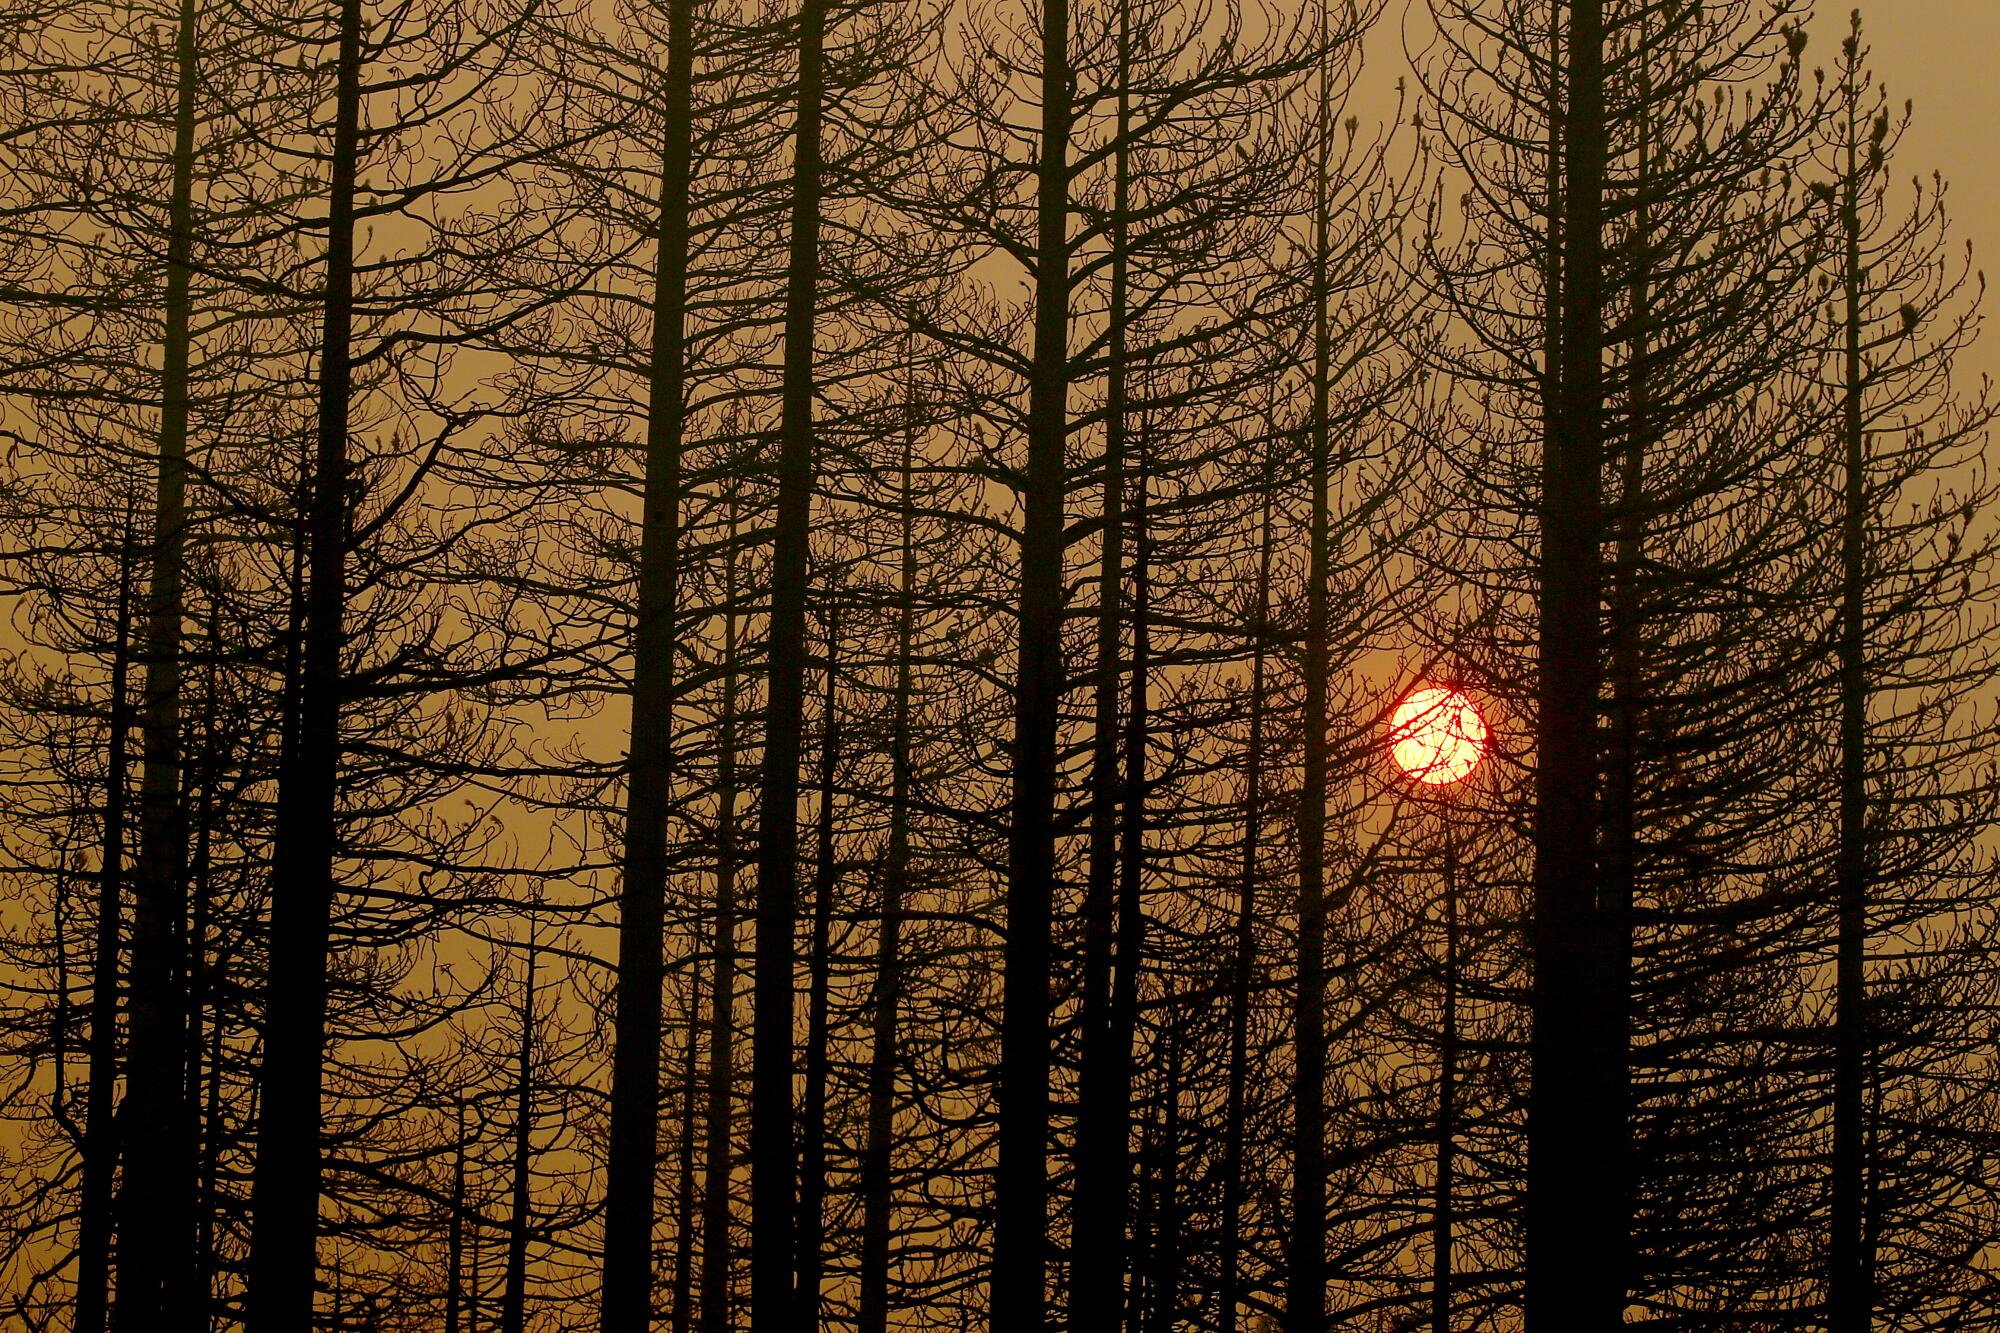 An orange sun in an orange sky, with silhouettes of burned trees